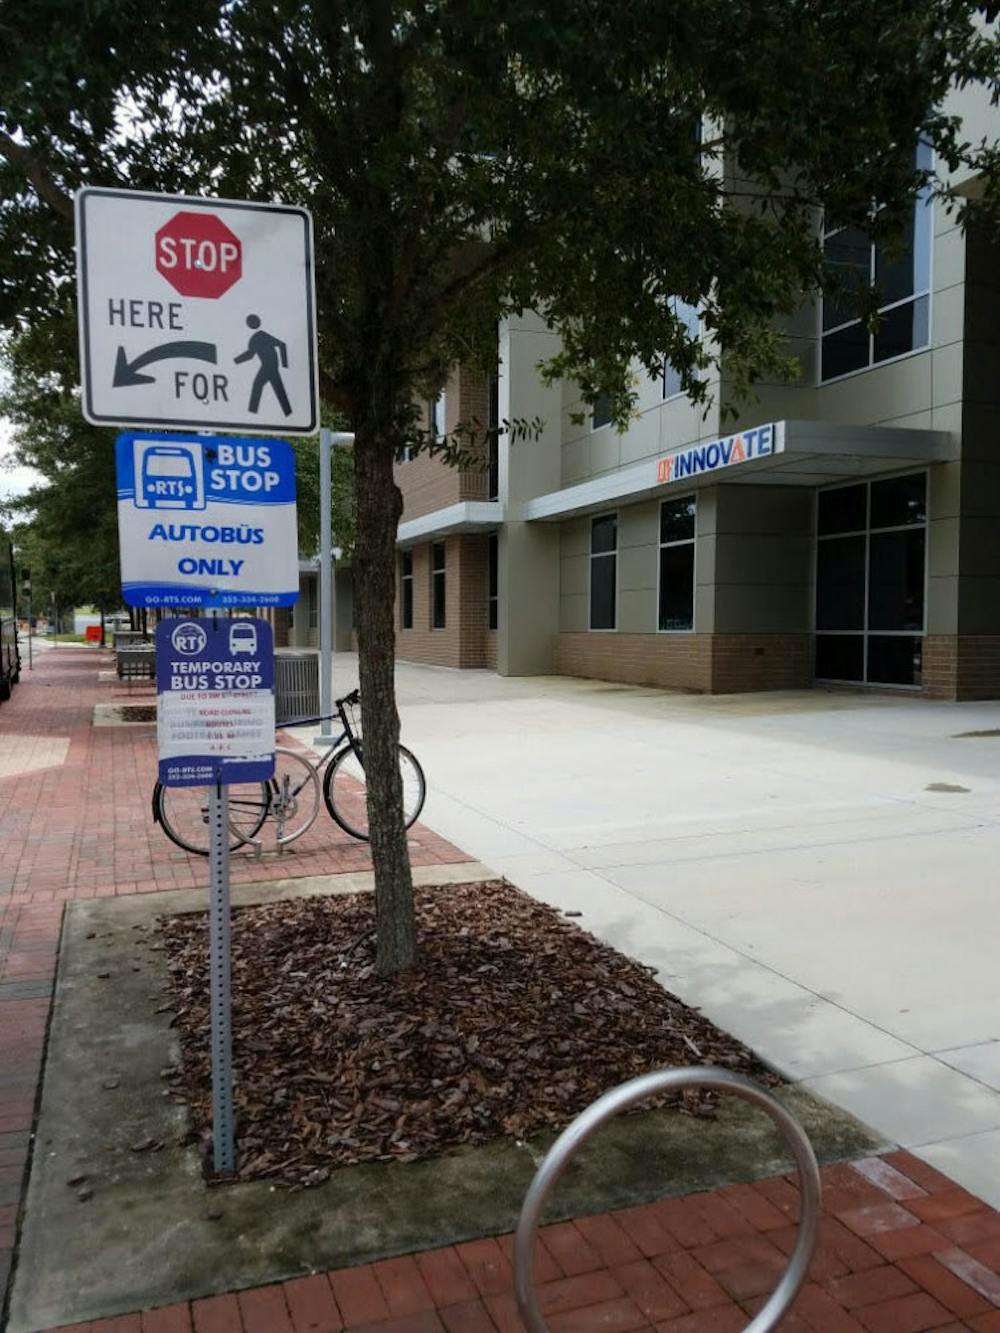 <p>"Autobus only" signs are appearing at bus stops across Gainesville. This sign is located outside Innovation Hub on Southwest Second Avenue.<span id="docs-internal-guid-278771f0-ee60-7d13-1a68-6475331bace2"></span></p>